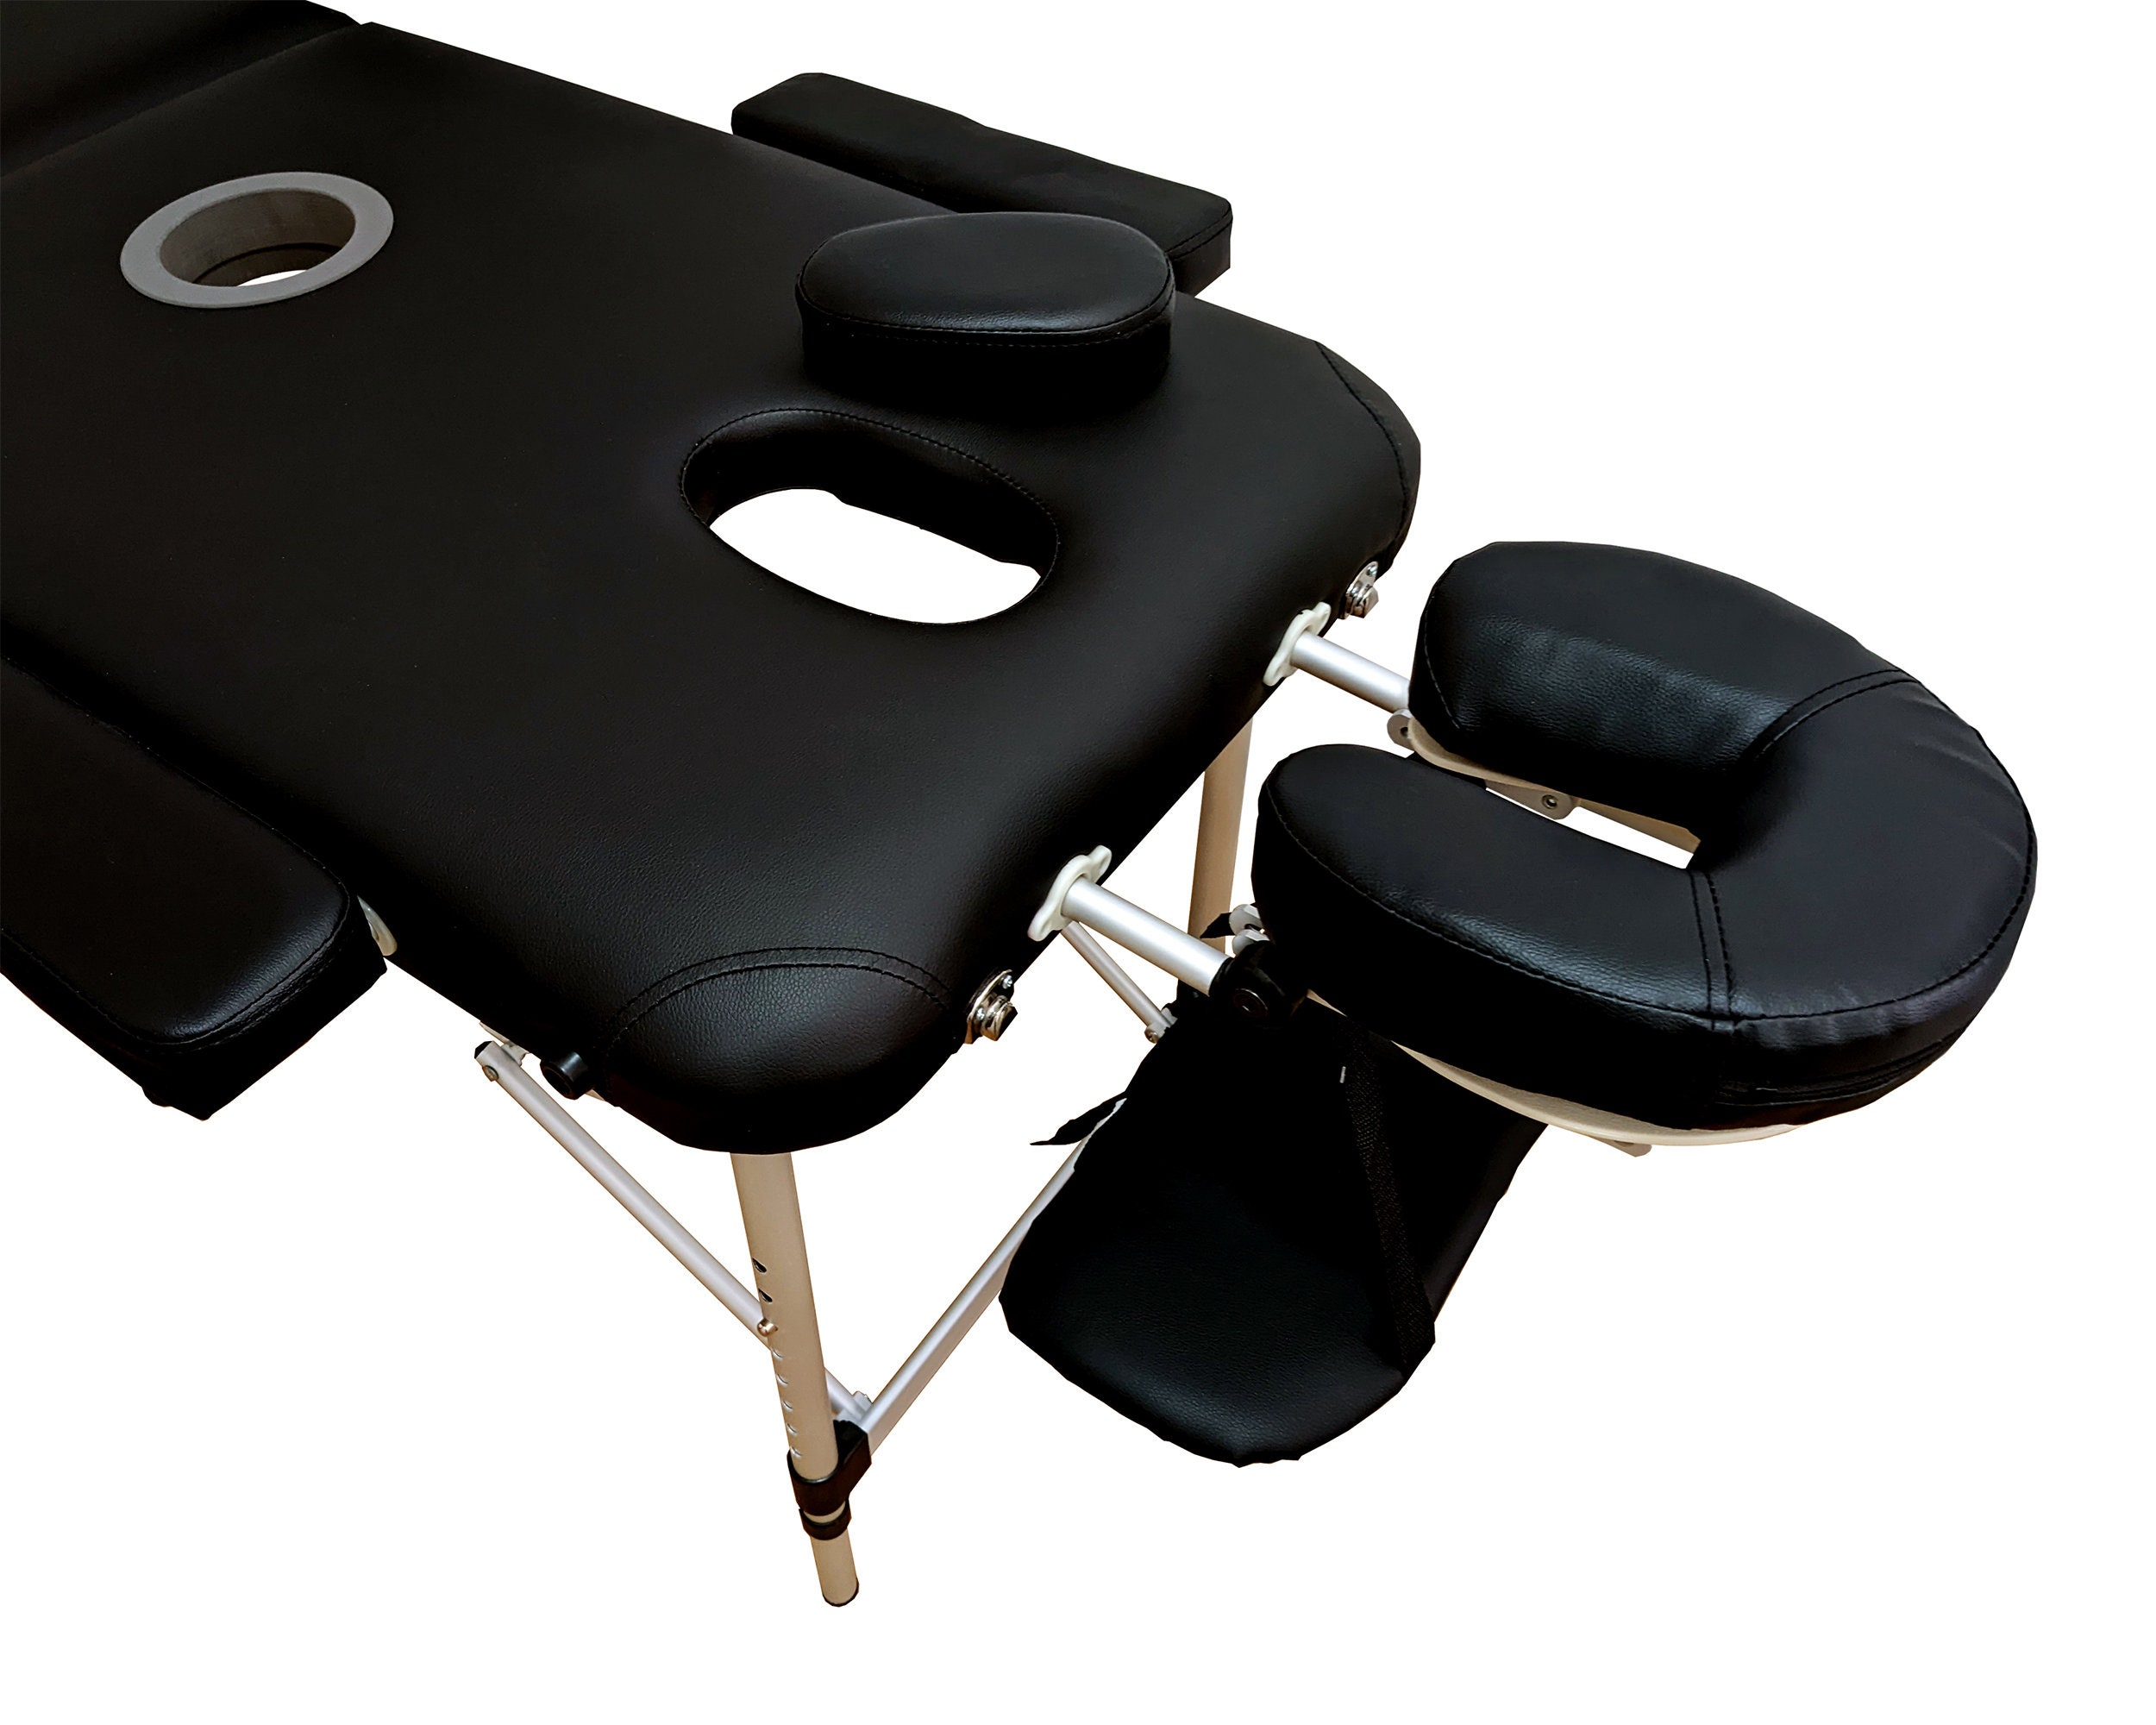 Milking Table With Large Glory Hole Leather BDSM Furniture photo